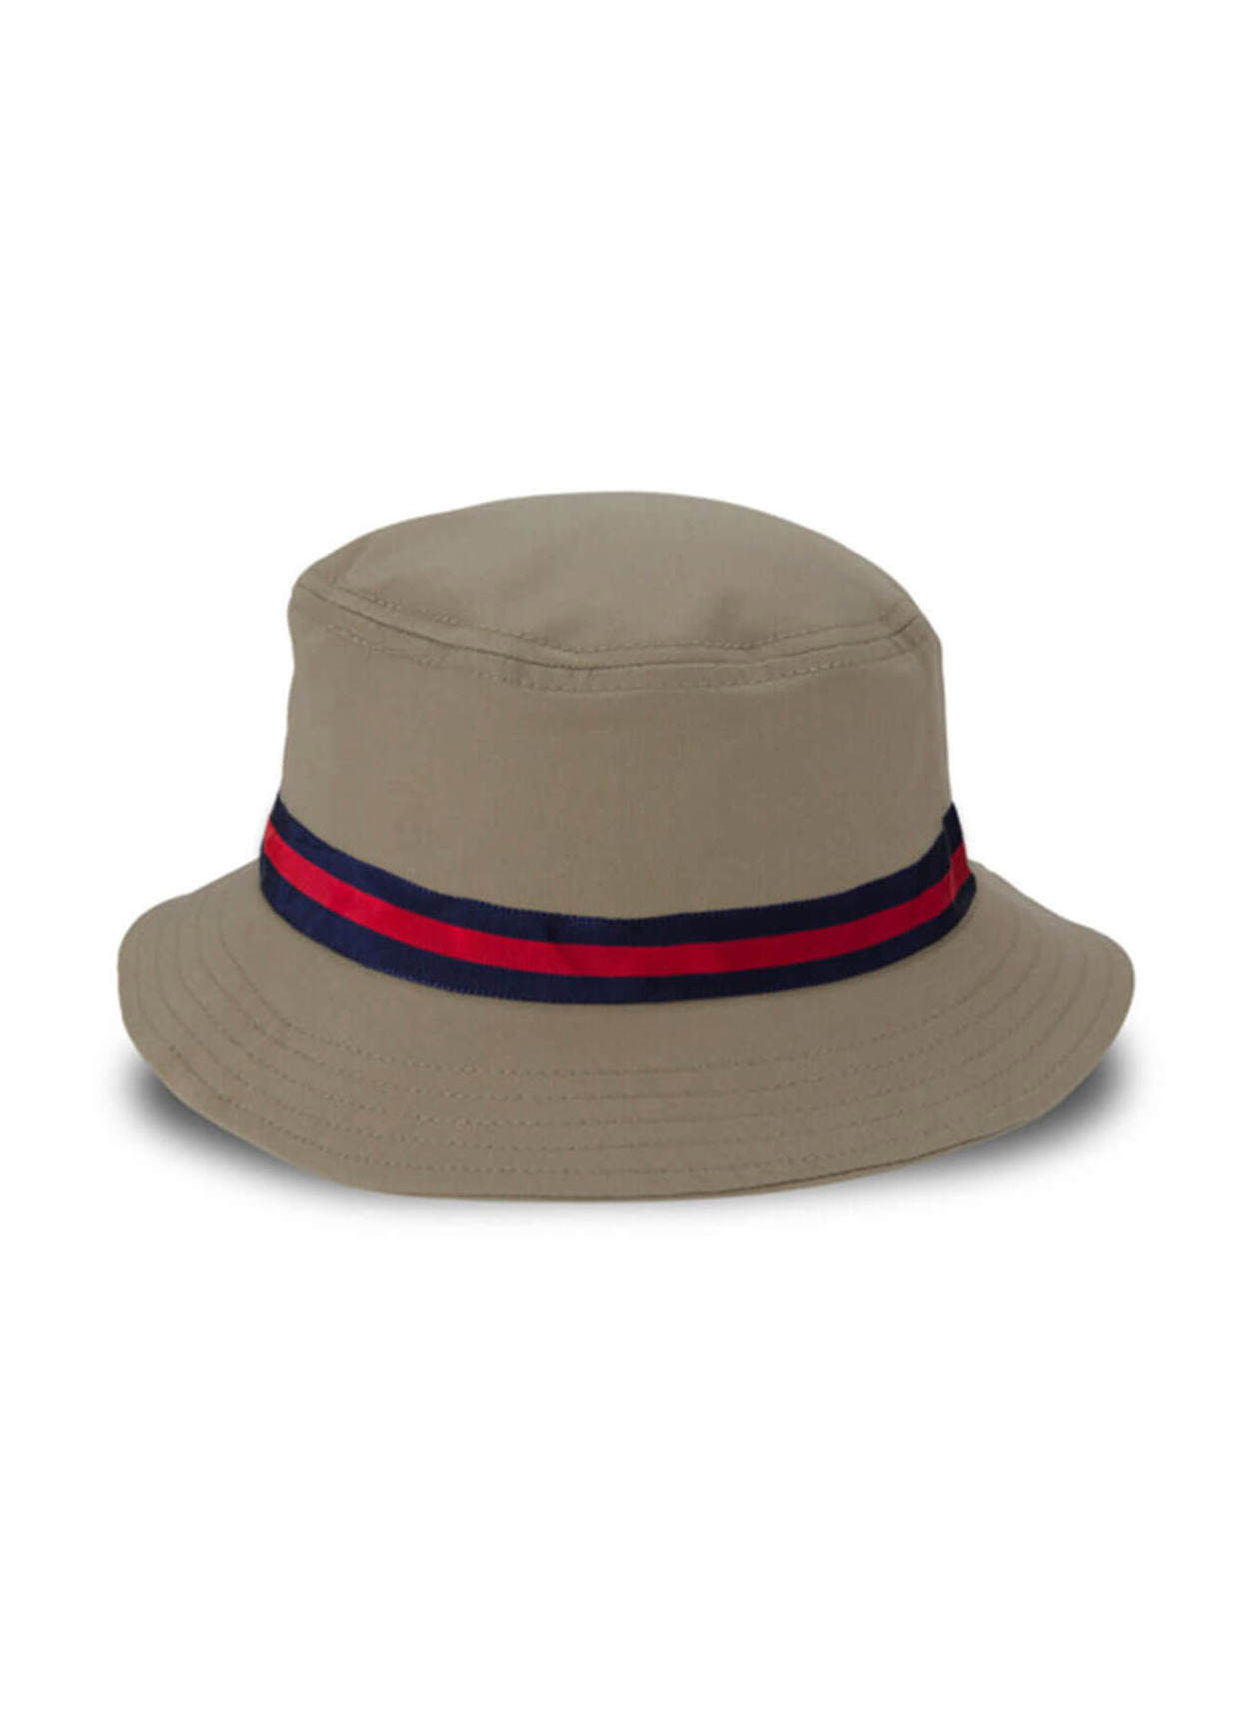 Imperial Khaki / Navy / Red The Oxford Bucket Hat